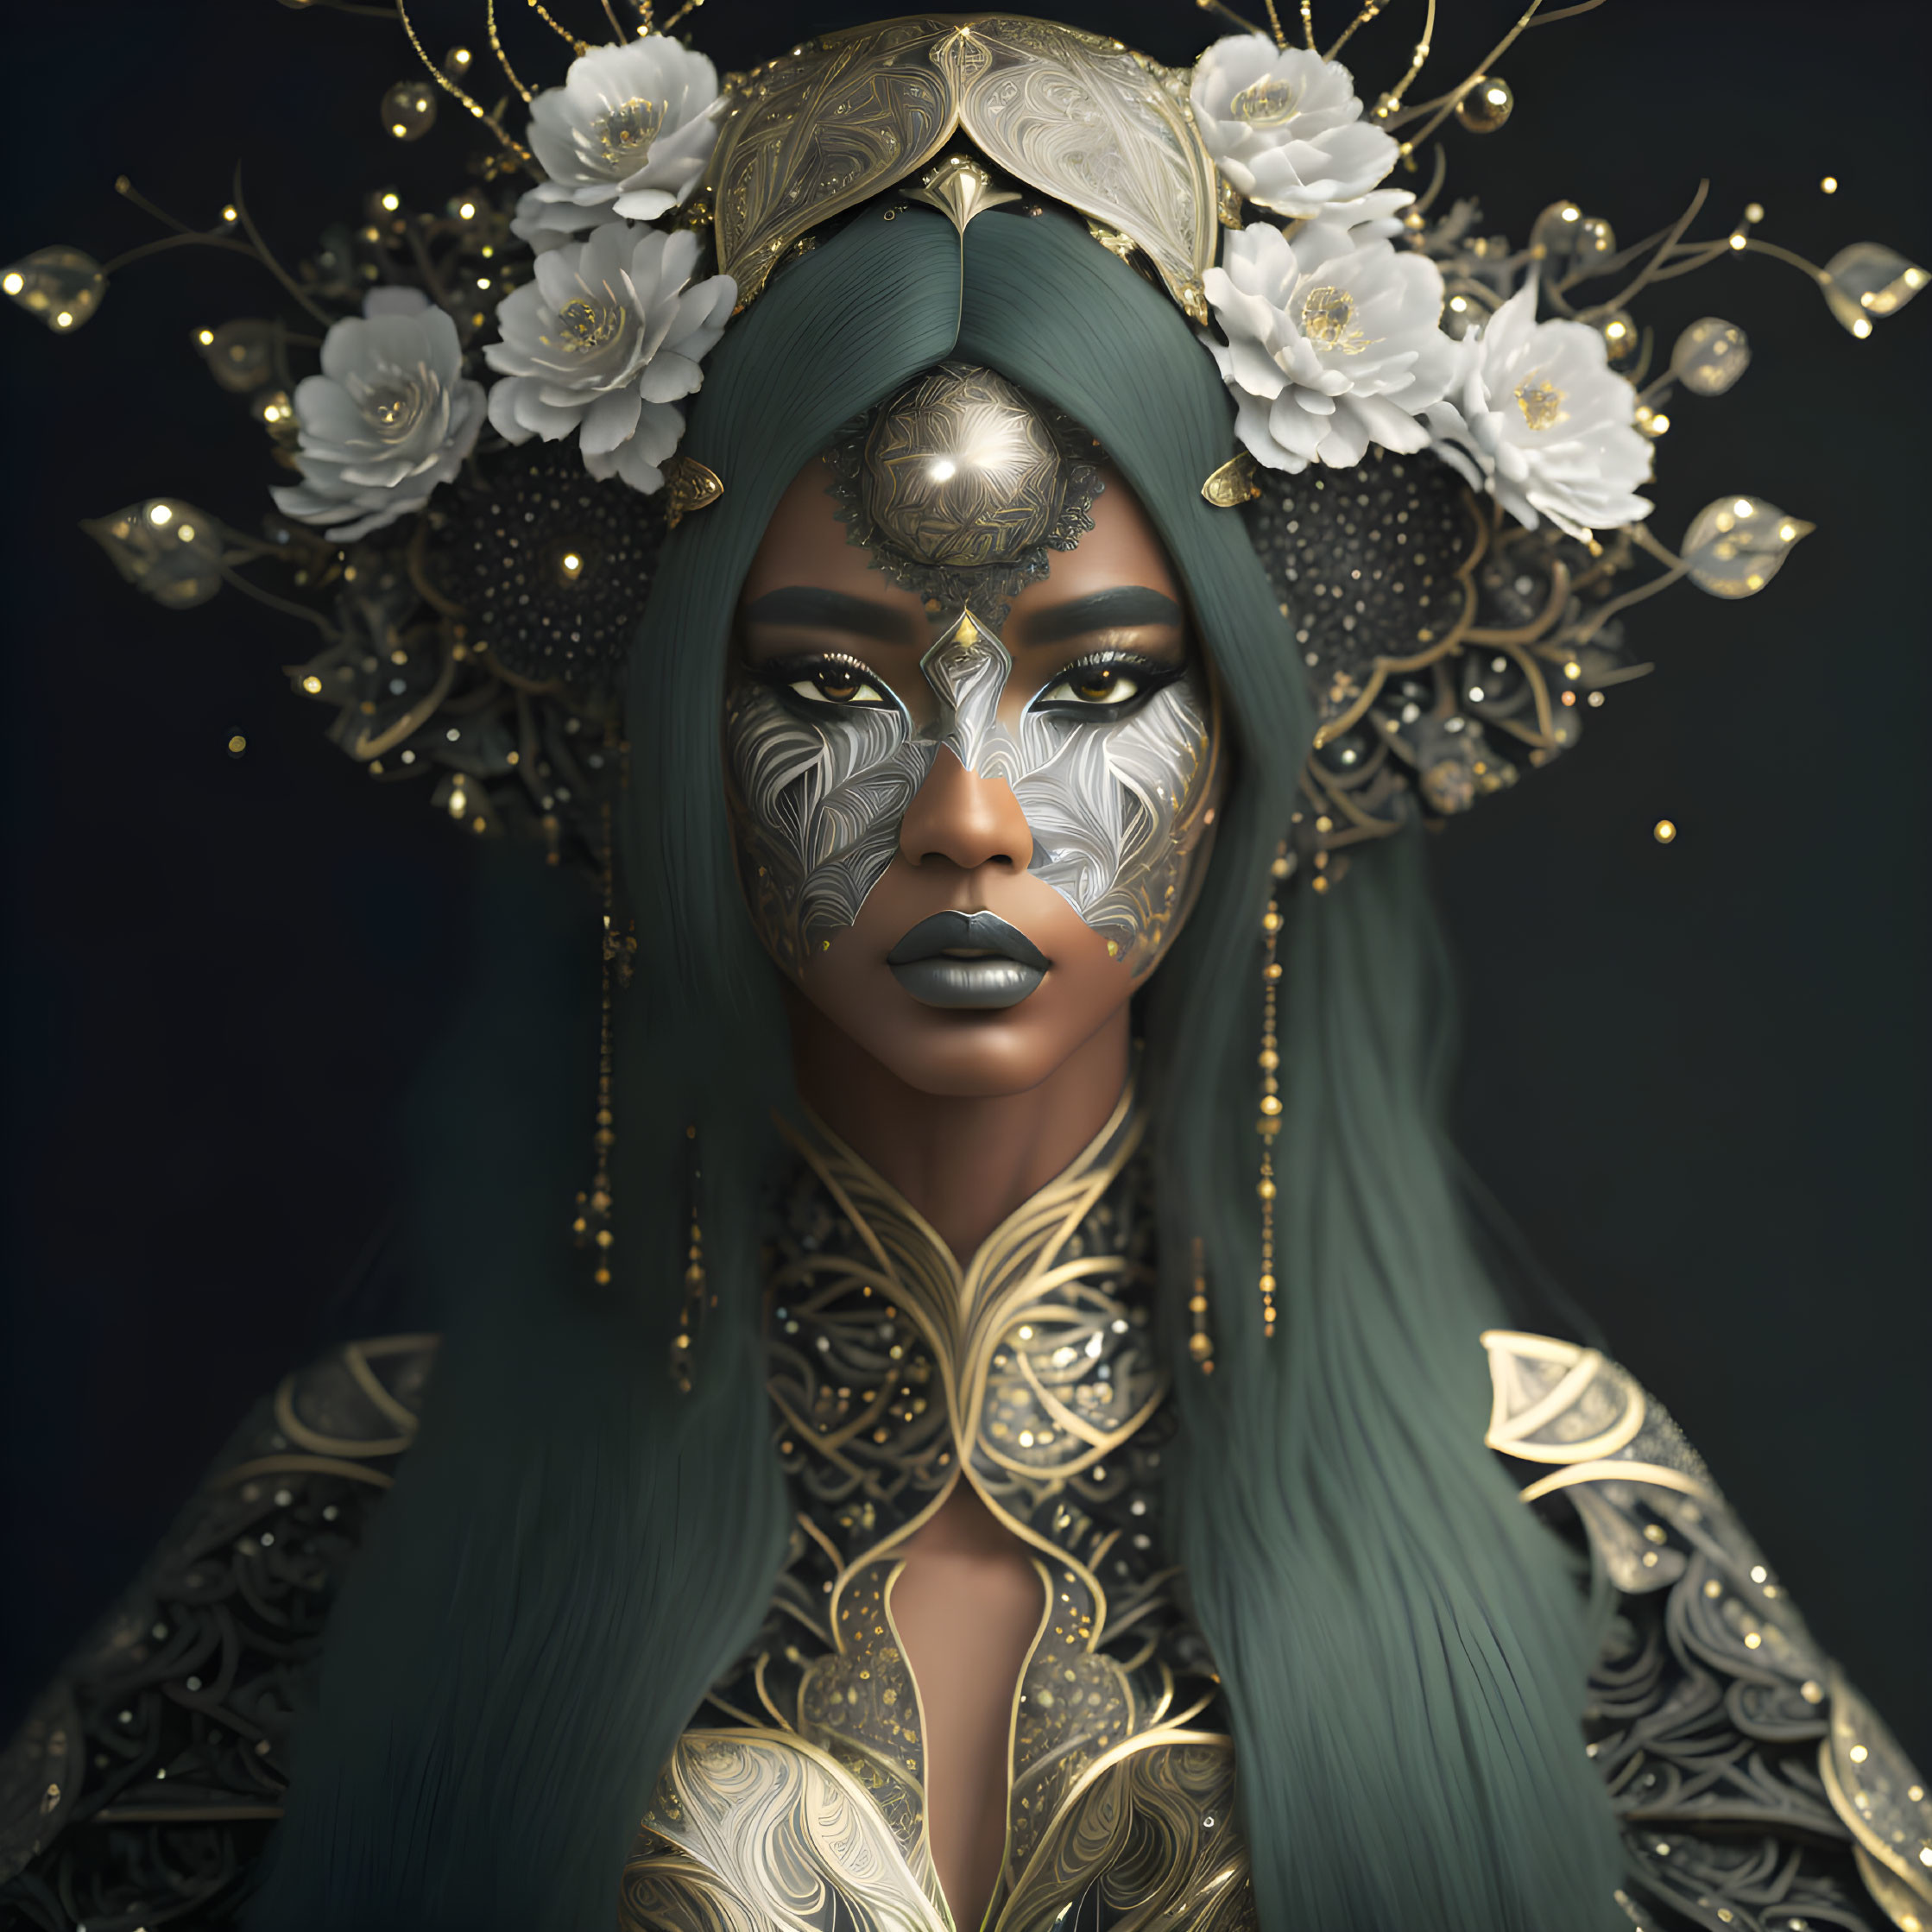 Portrait of woman with teal hair, golden headpiece, facial markings, solemn expression.